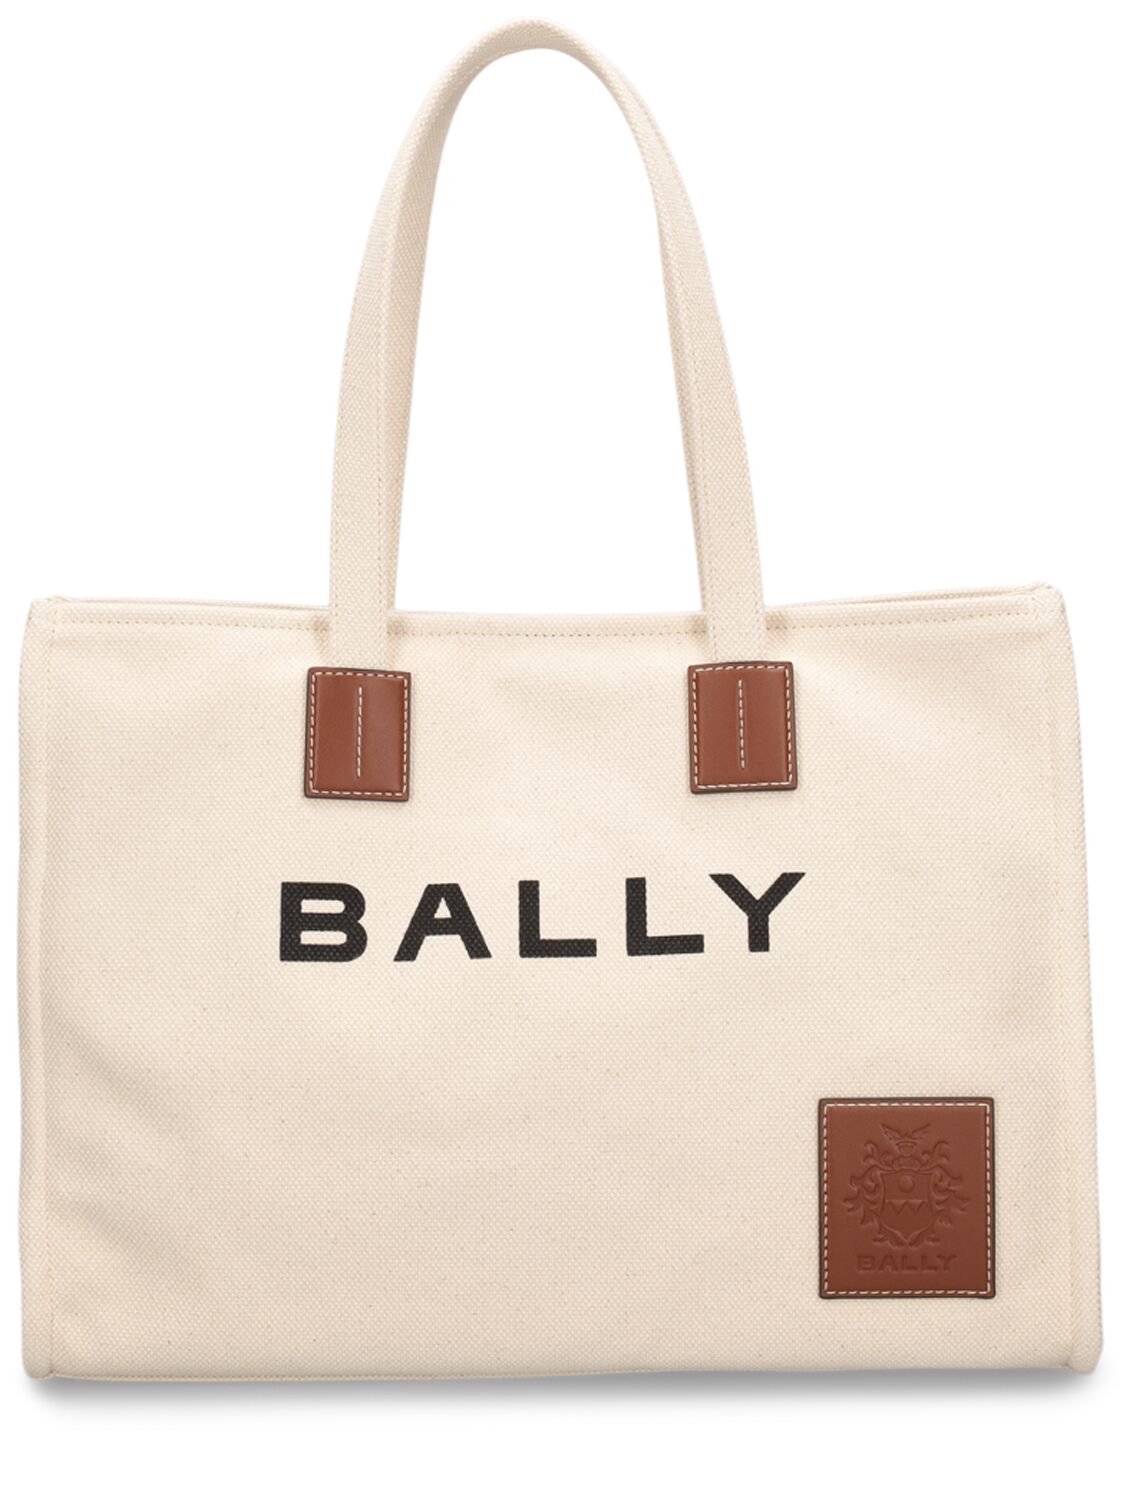 Bally Akelei Canvas Tote Bag In Natural,cuoio